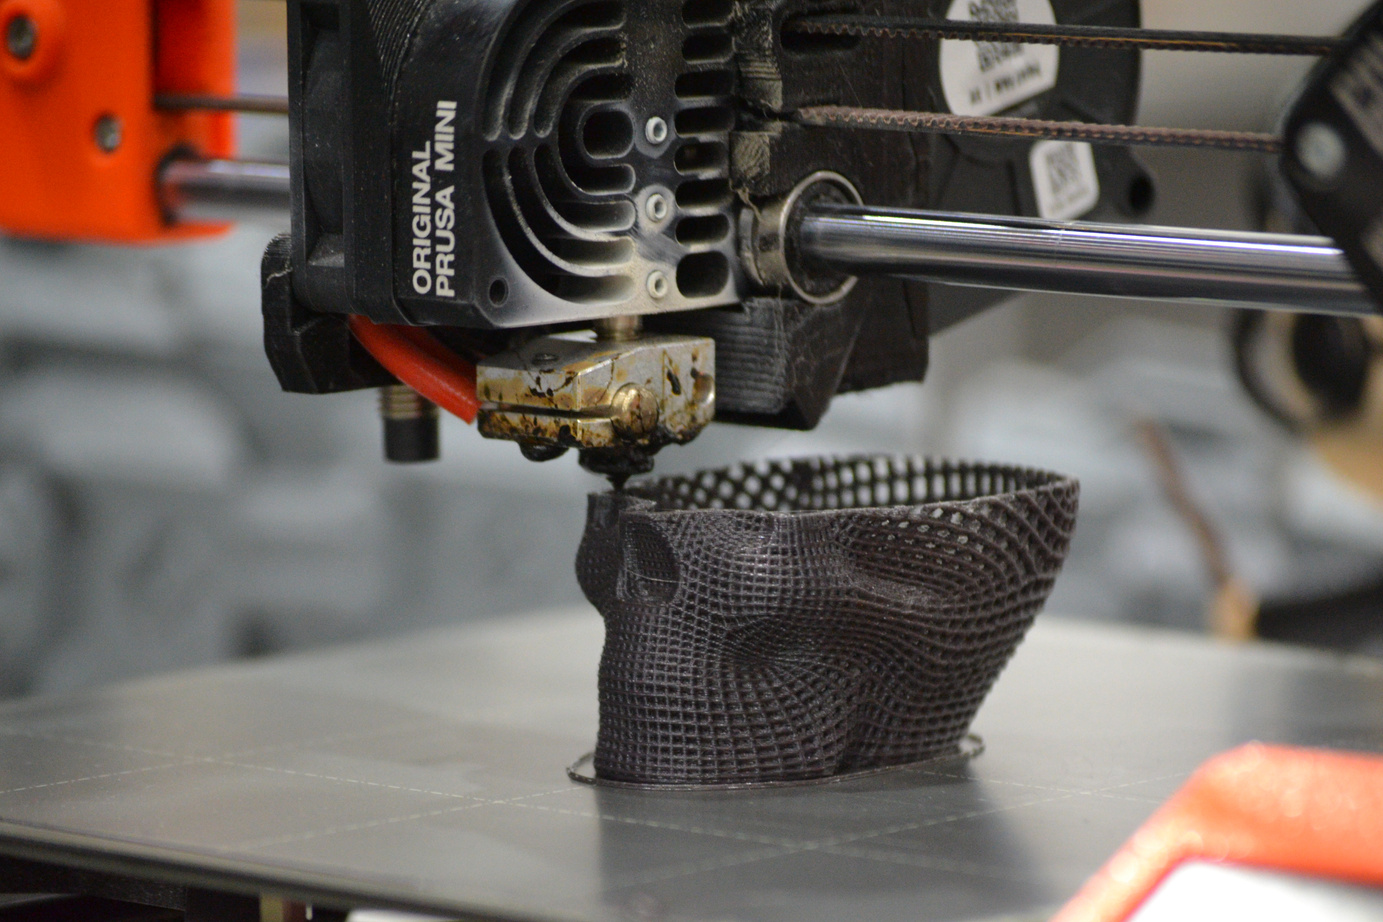 3D Printer Printing Prototype of Human Skull from Molten Plastic. Process of Creating Prototype